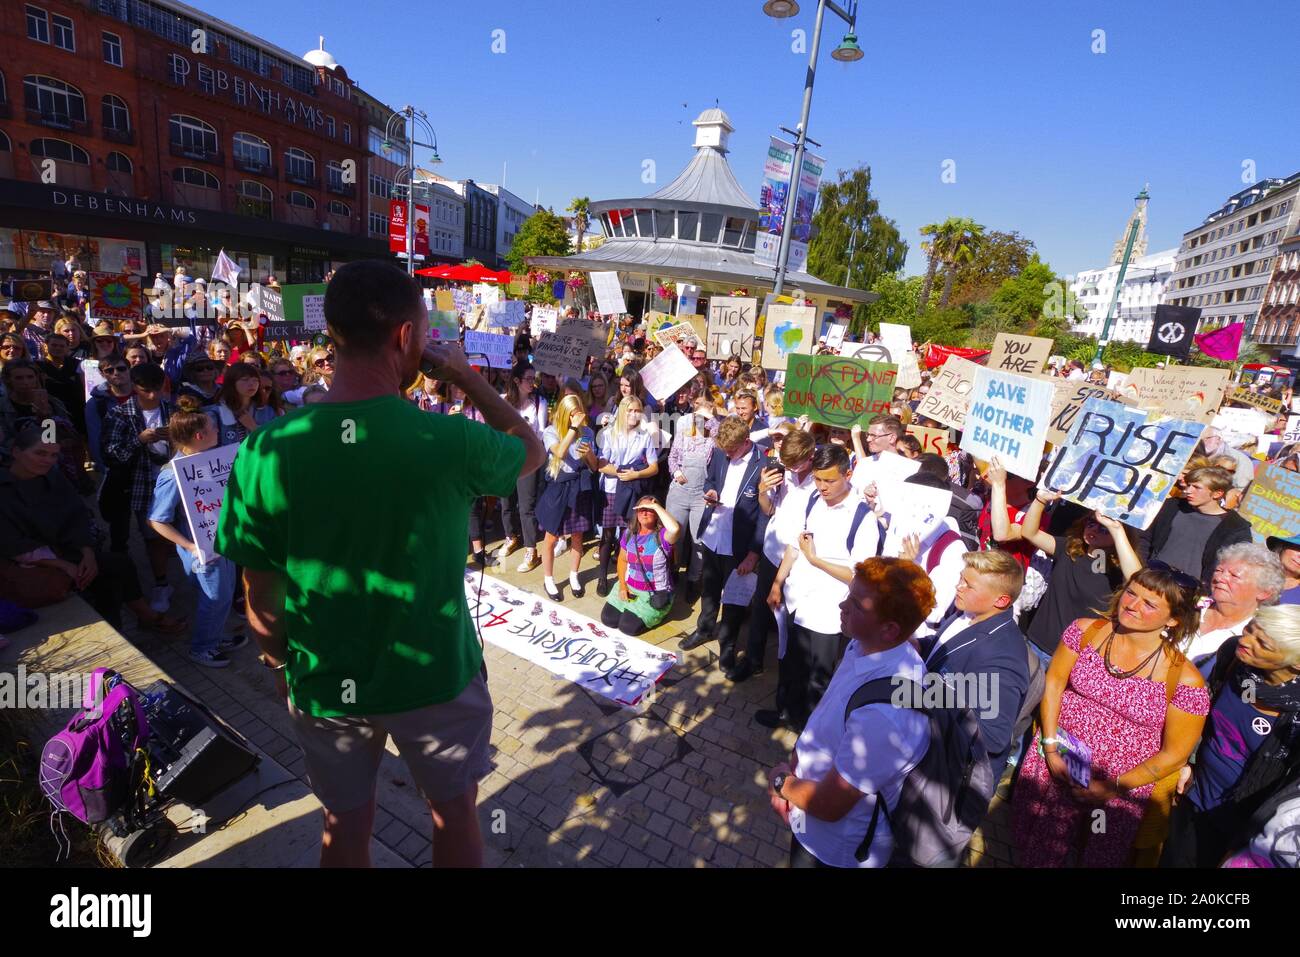 Hundreds in Bournemouth joined in the Global Climate Strike 20TH September 2019. With a gathering in Bournemouth Square a call  was made for action on stopping the effects of Climate Change.  The Global Strike was on an international scale. Stock Photo